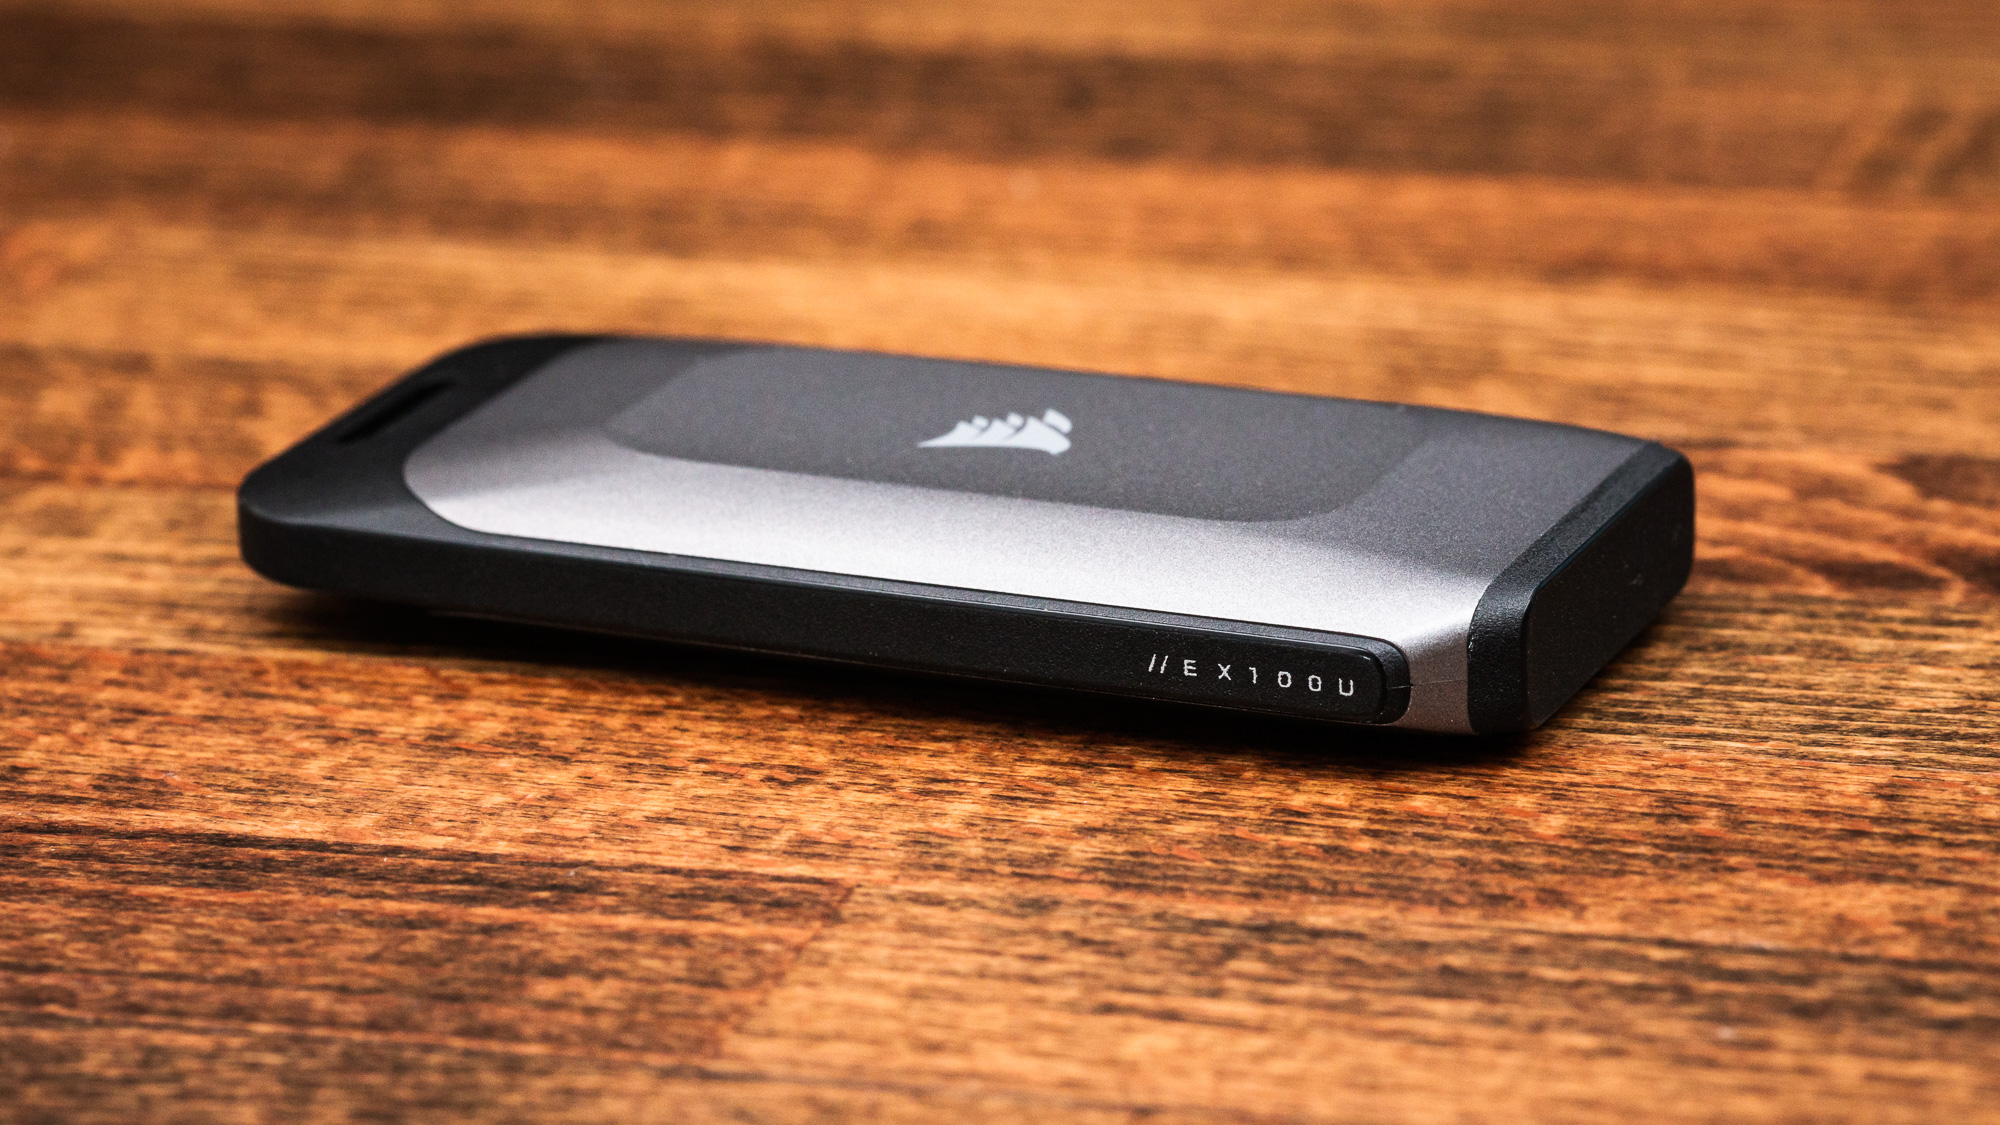 Corsair EX100U Portable SSD Review: The Good, The Bad, and the